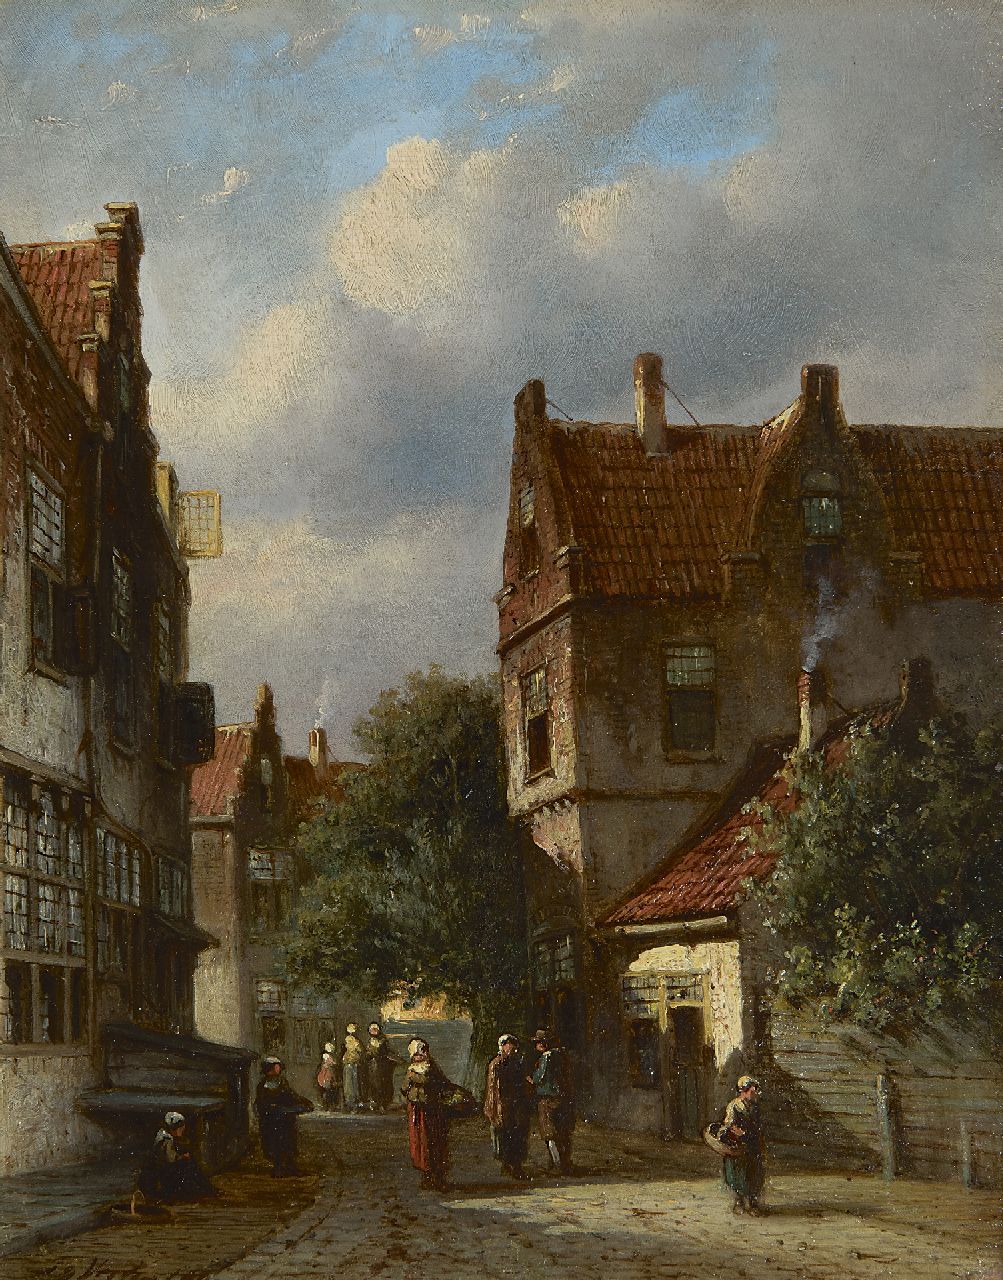 Vertin P.G.  | Petrus Gerardus Vertin | Paintings offered for sale | A Dutch street scene, oil on panel 23.6 x 18.6 cm, signed l.l.